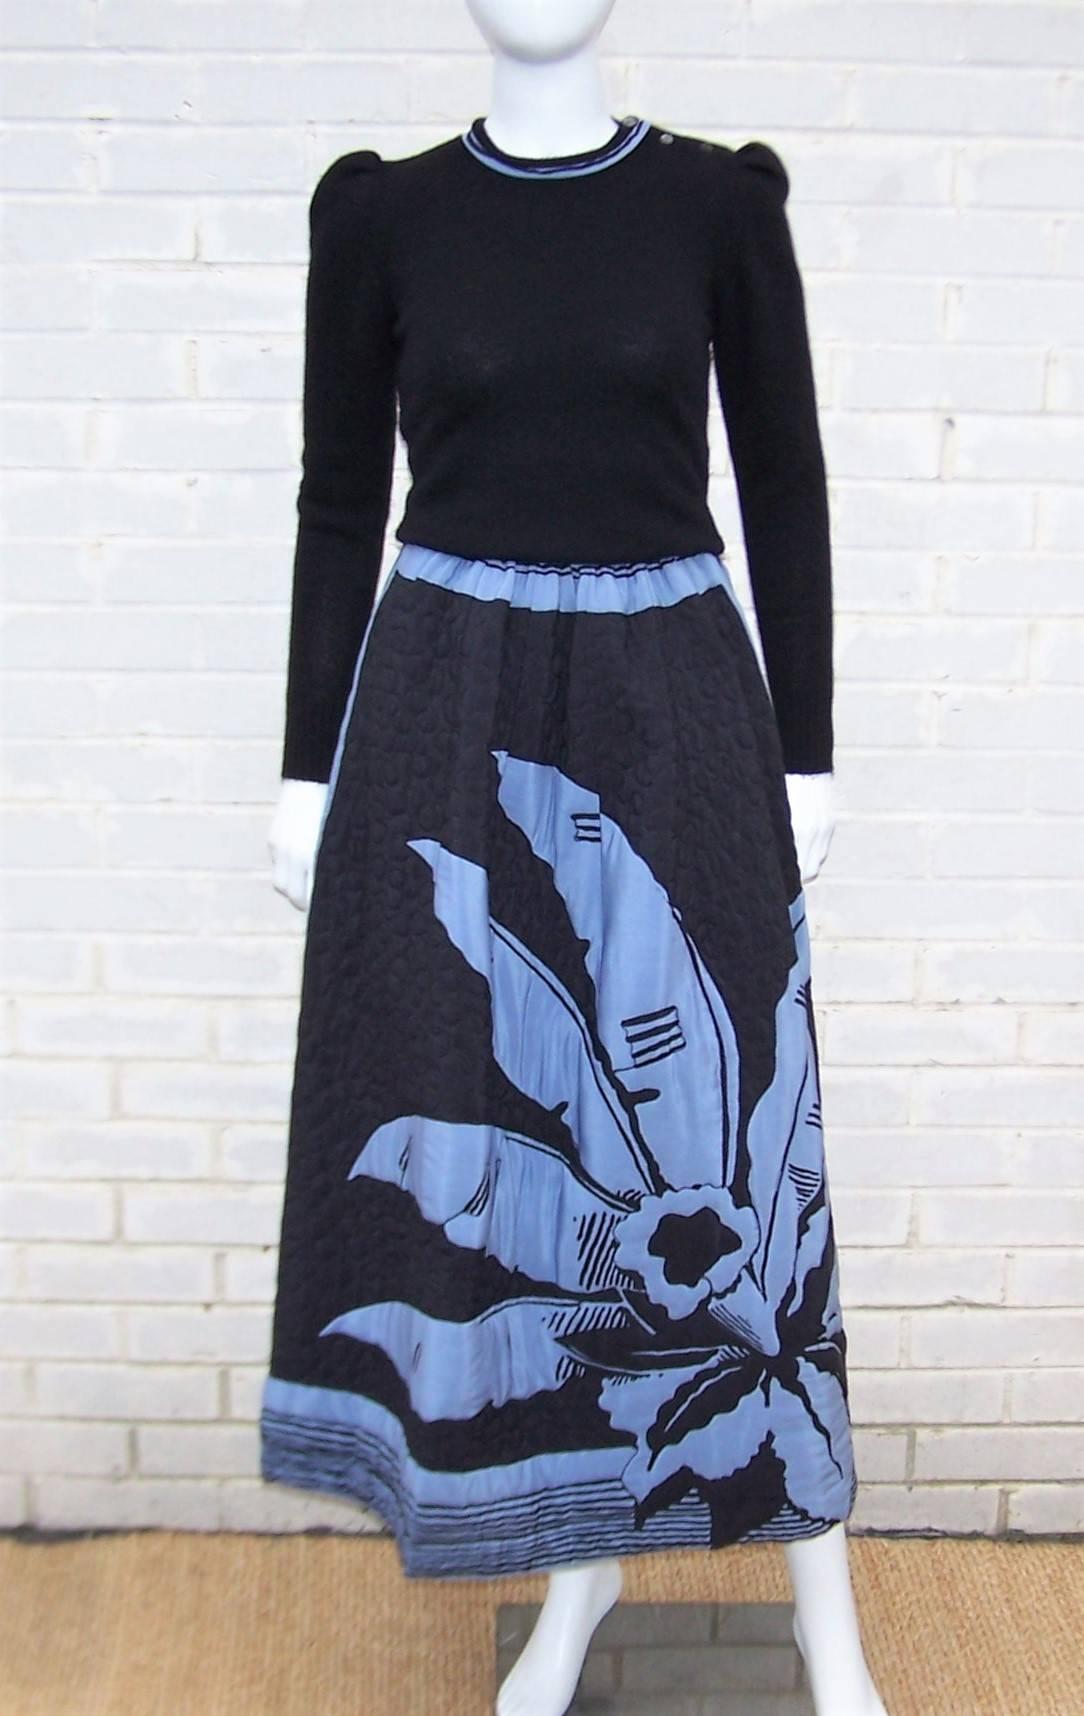 Michaele Vollbracht's talent as a graphic artist is evident in the pop art design of this maxi quilted skirt and cashmere sweater ensemble.  The black silk skirt contrasts with the periwinkle blue tropical floral design which is bordered by stripes.